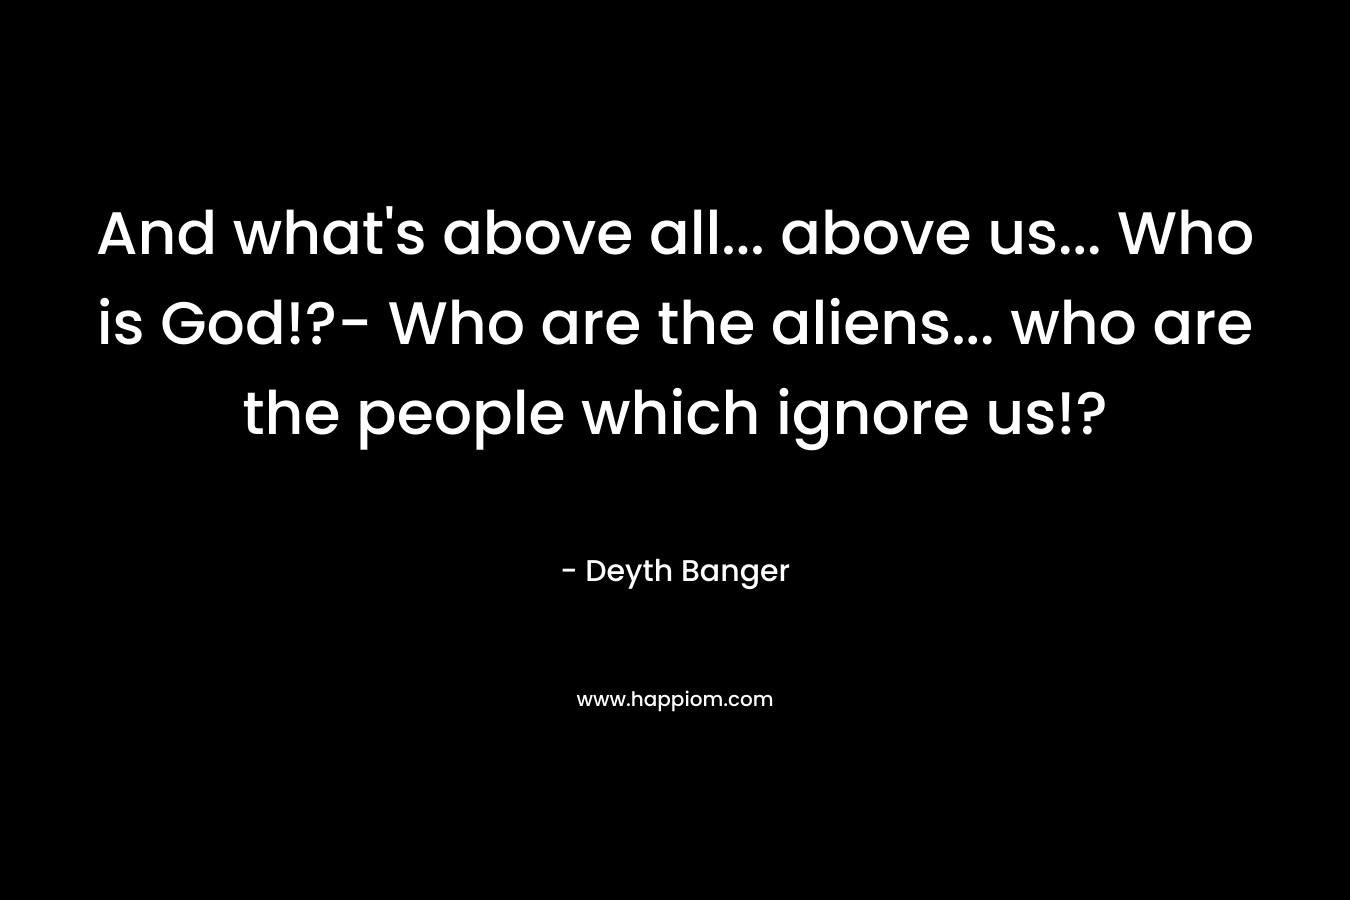 And what’s above all… above us… Who is God!?- Who are the aliens… who are the people which ignore us!? – Deyth Banger